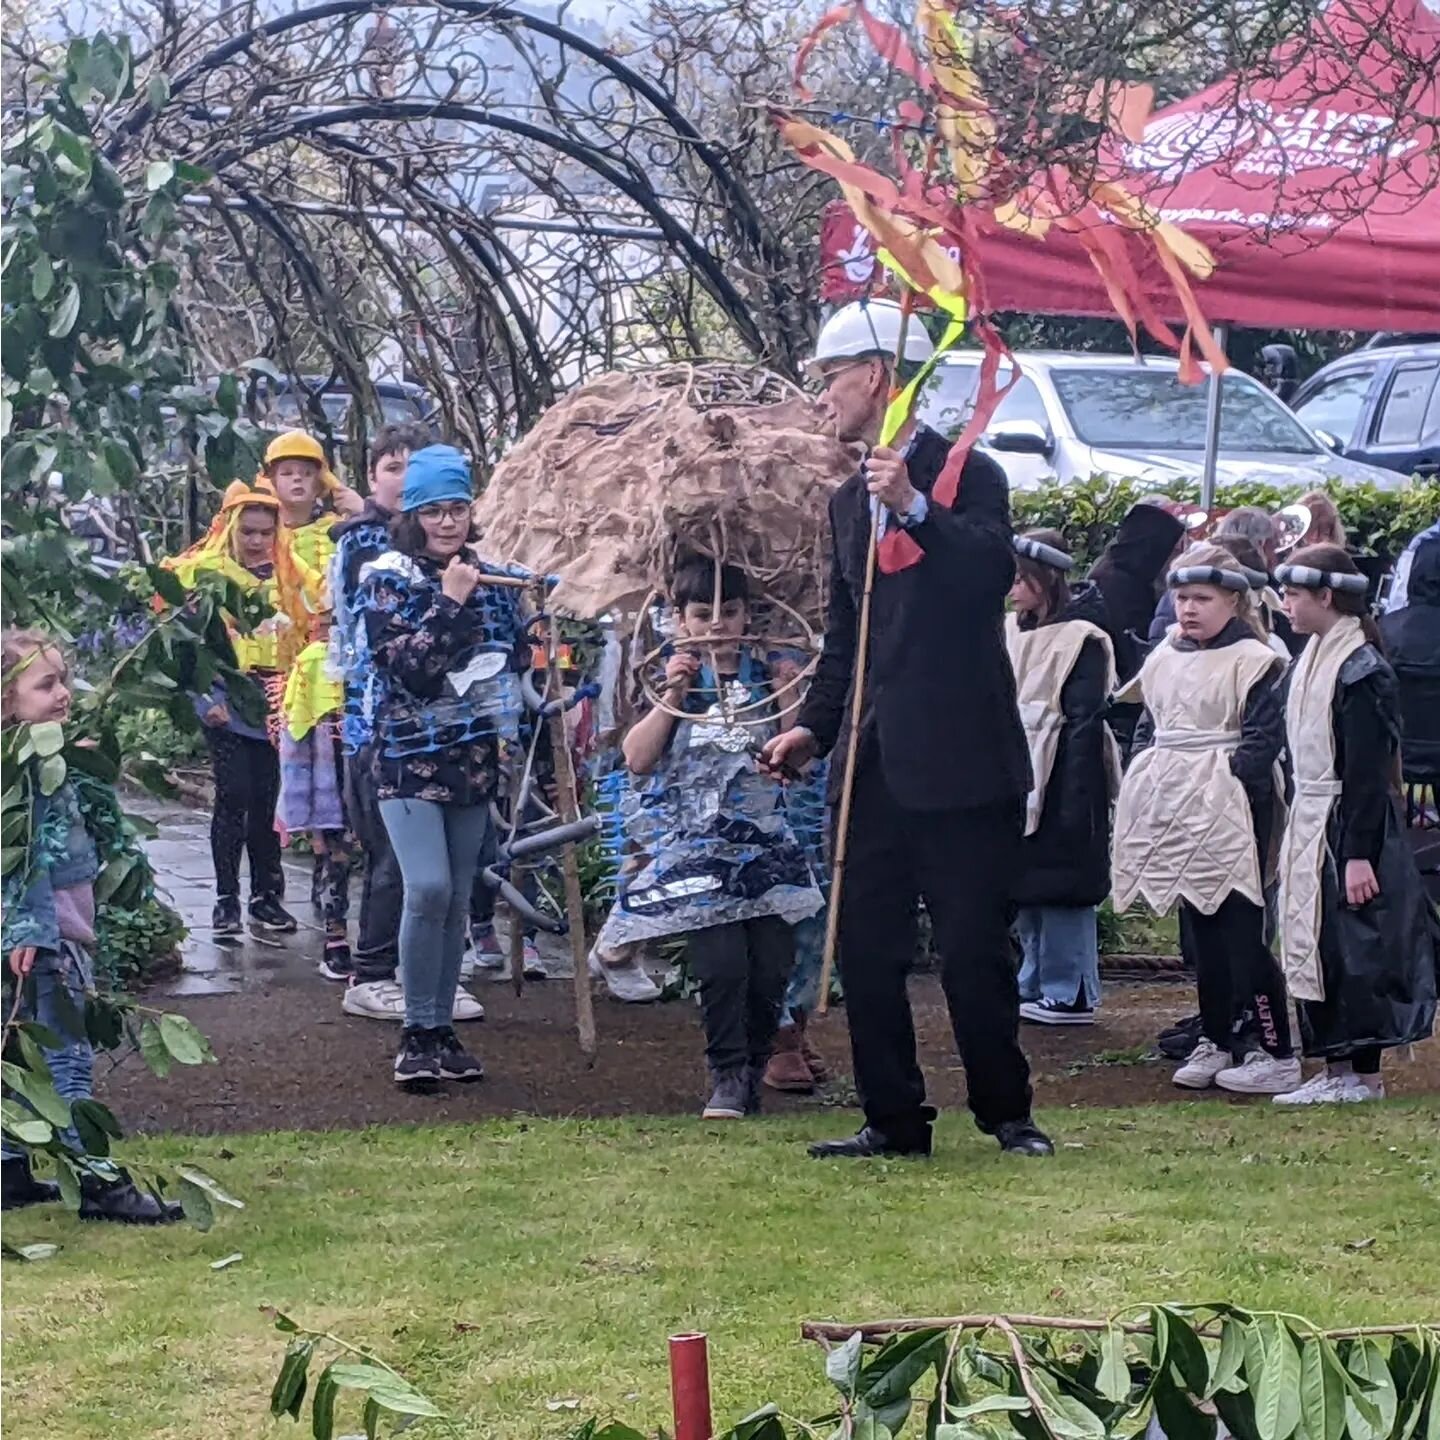 Well hippos like it wet.
Despite the rain we had a really good turn out of pupils and families and overall the event seems to have been well received. This pic includes, from the left: the trees, the road workers, the Hippo (above water) and the bone